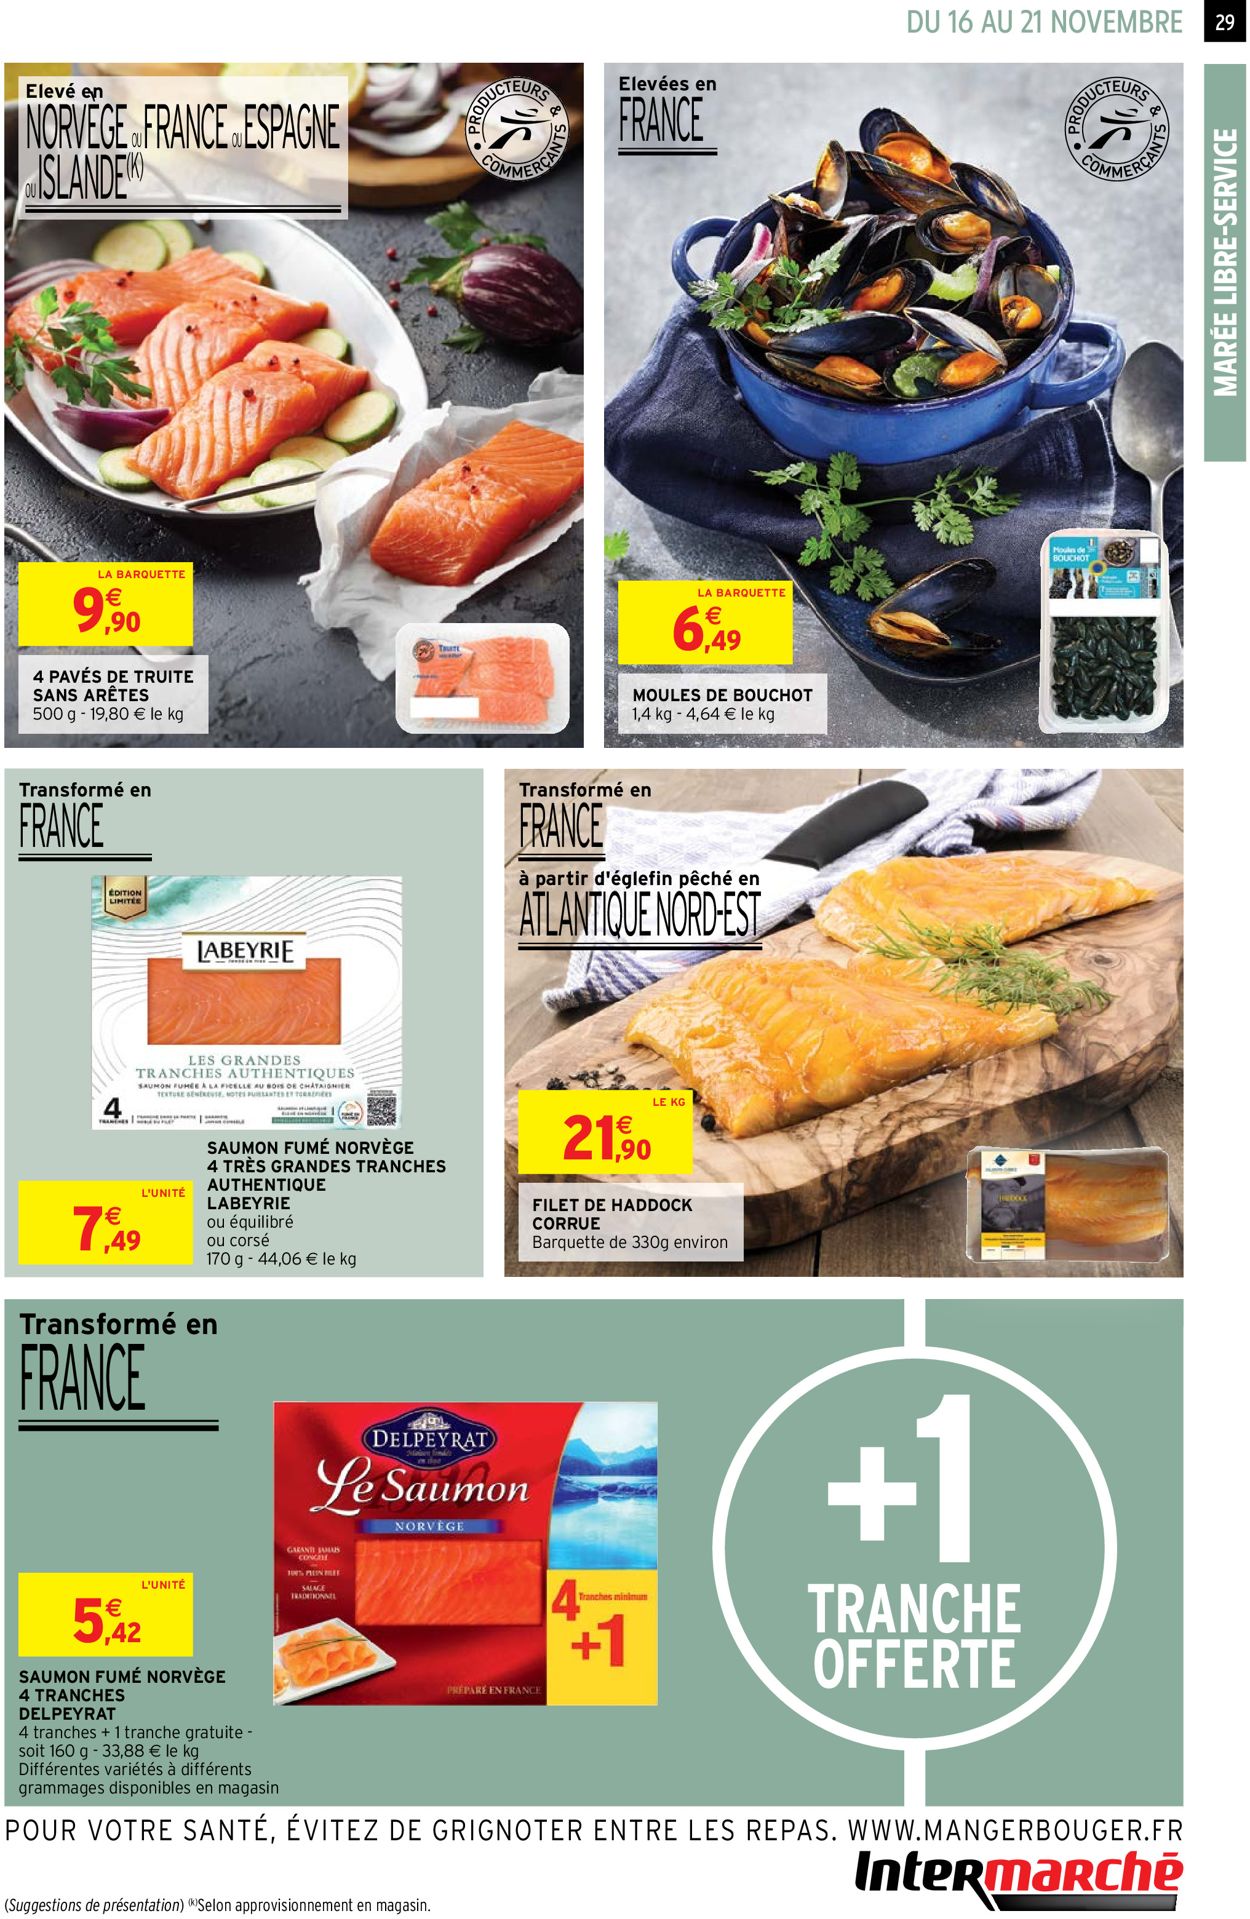 Intermarché  BLACK FRIDAY 2021 Catalogue - 16.11-21.11.2021 (Page 29)